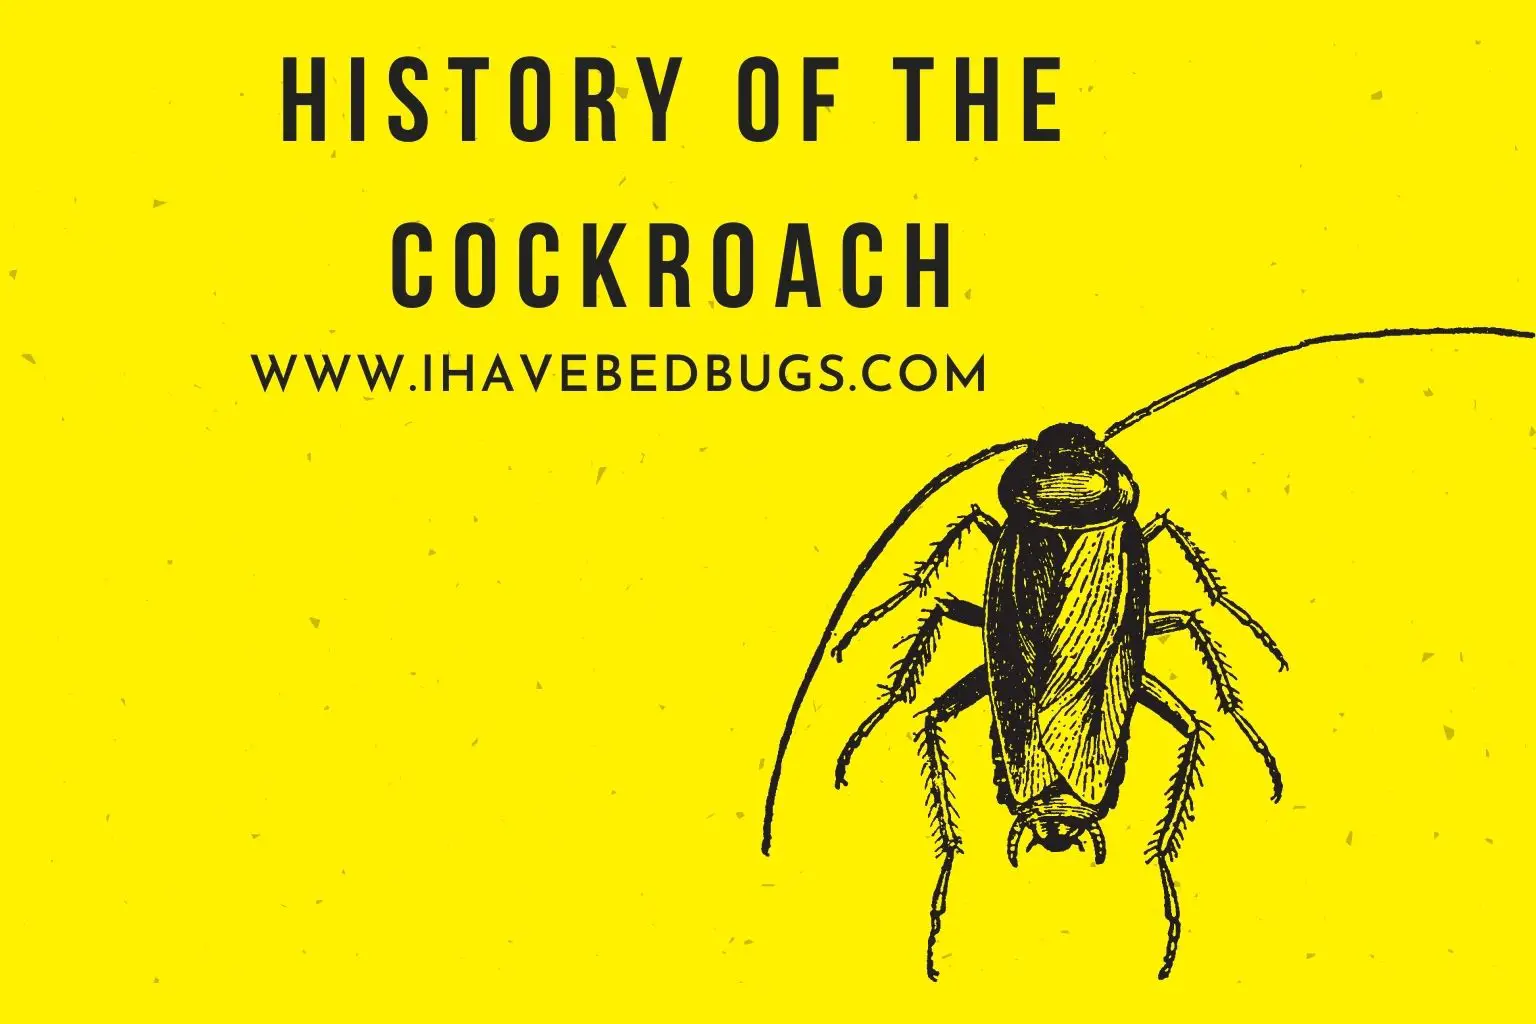 History of the Cockroach